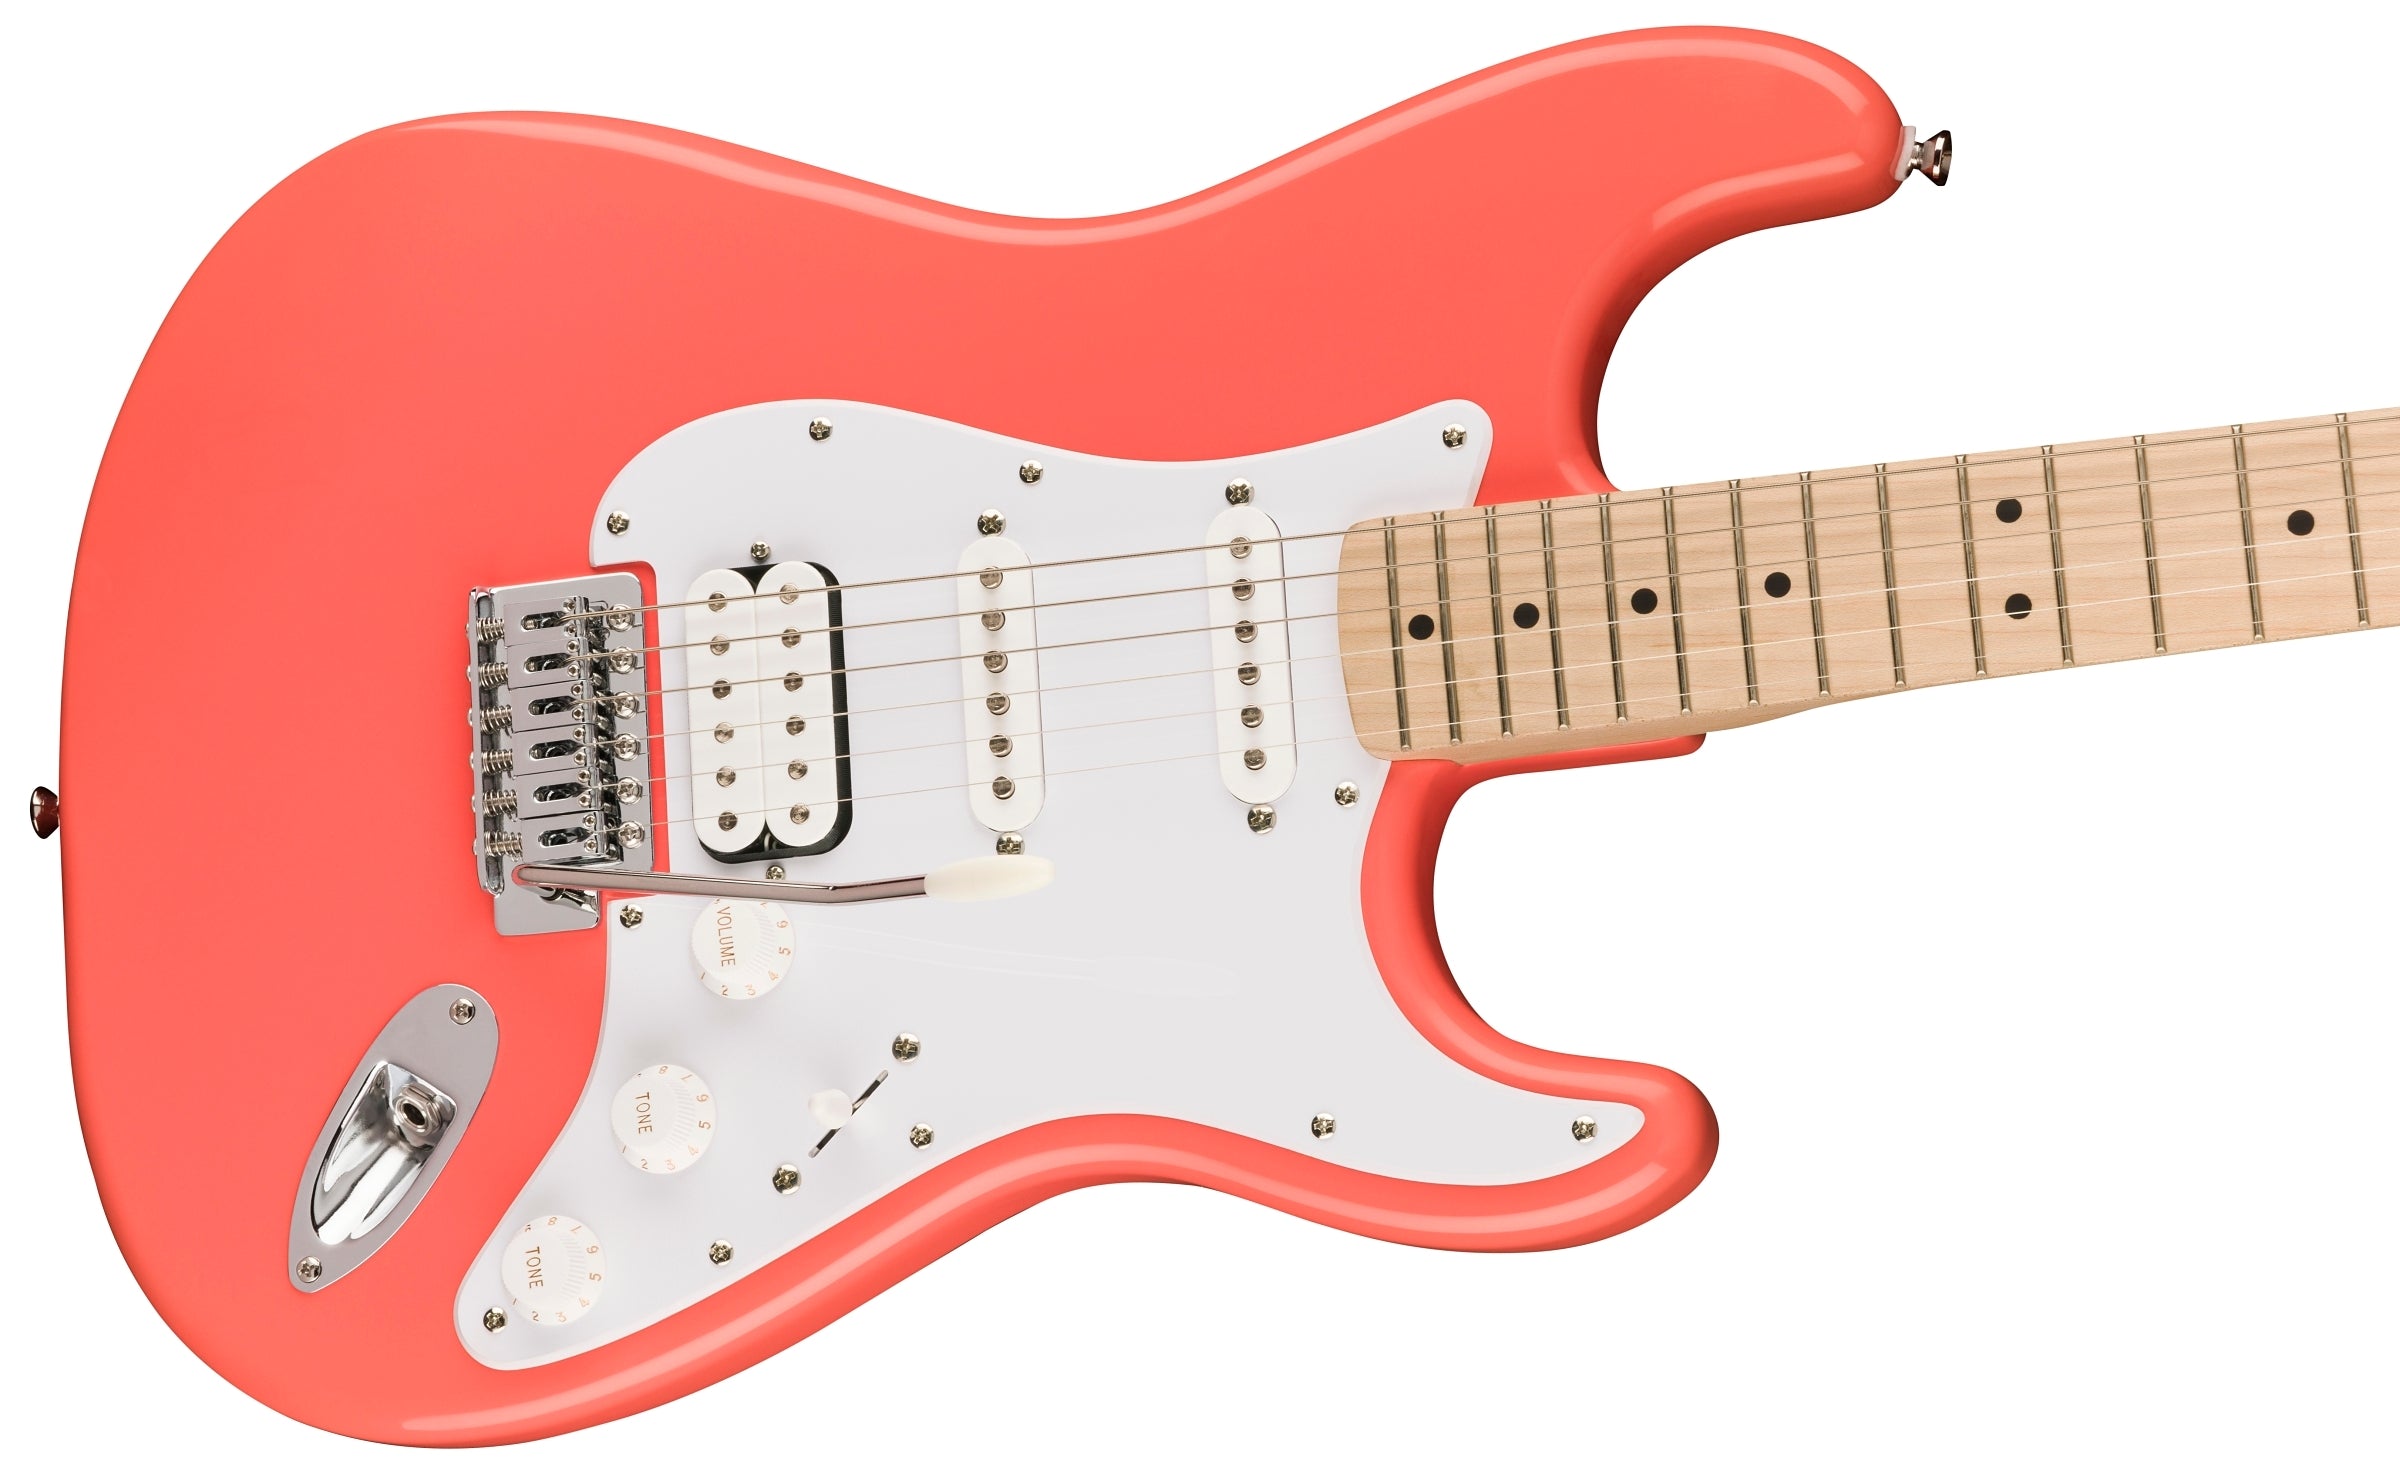 Squier Sonic Stratocaster Solidbody Electric Guitar  - Tahitian Coral